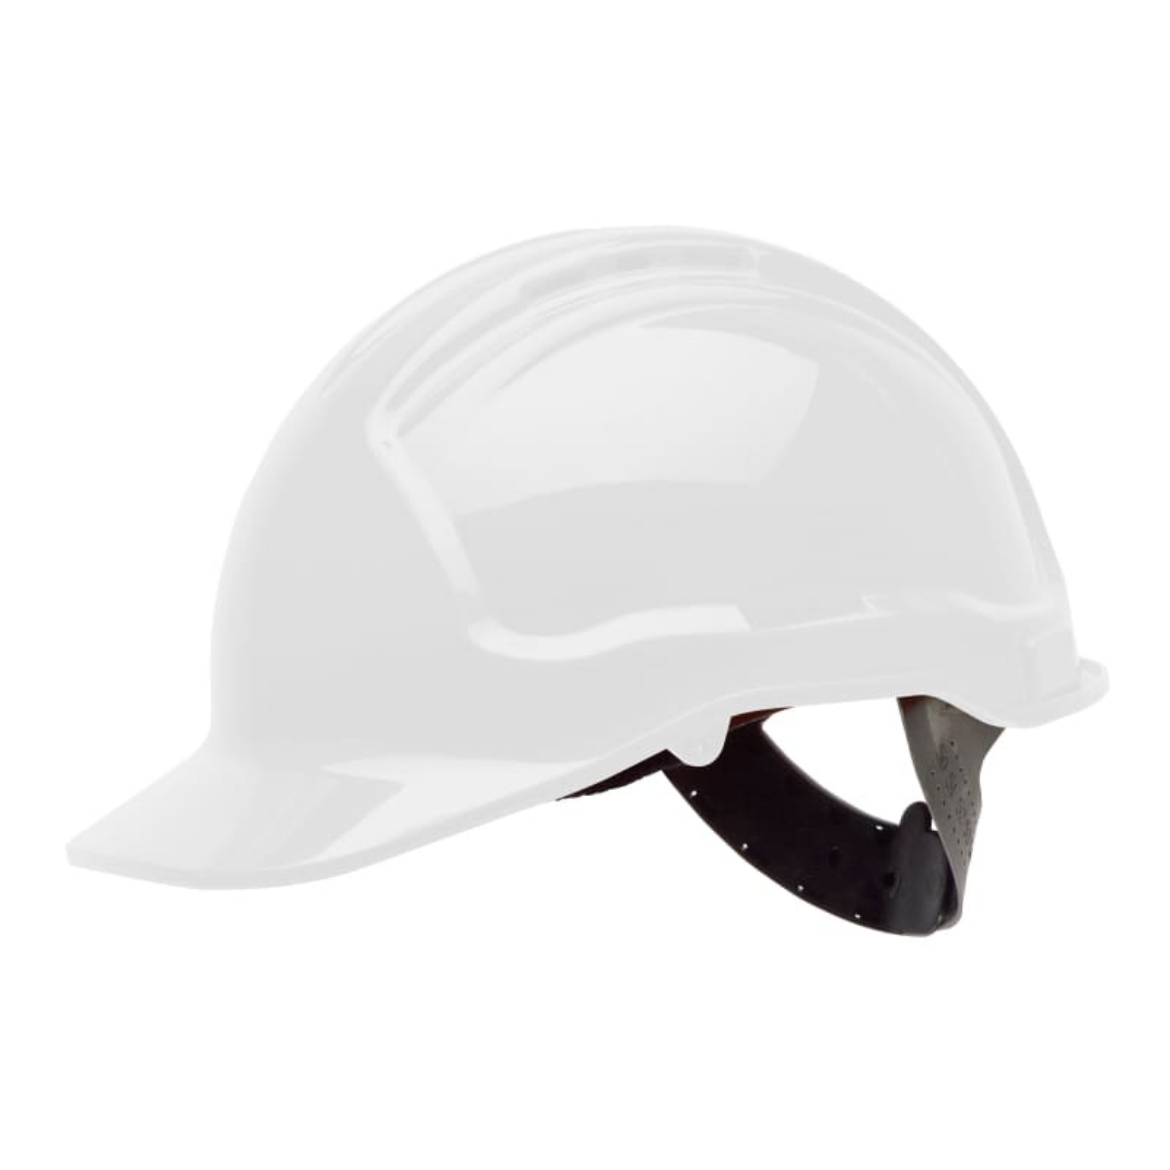 Picture of Force360 Hard Hat, Vented, 6 Point Pinlock Harness Type 2